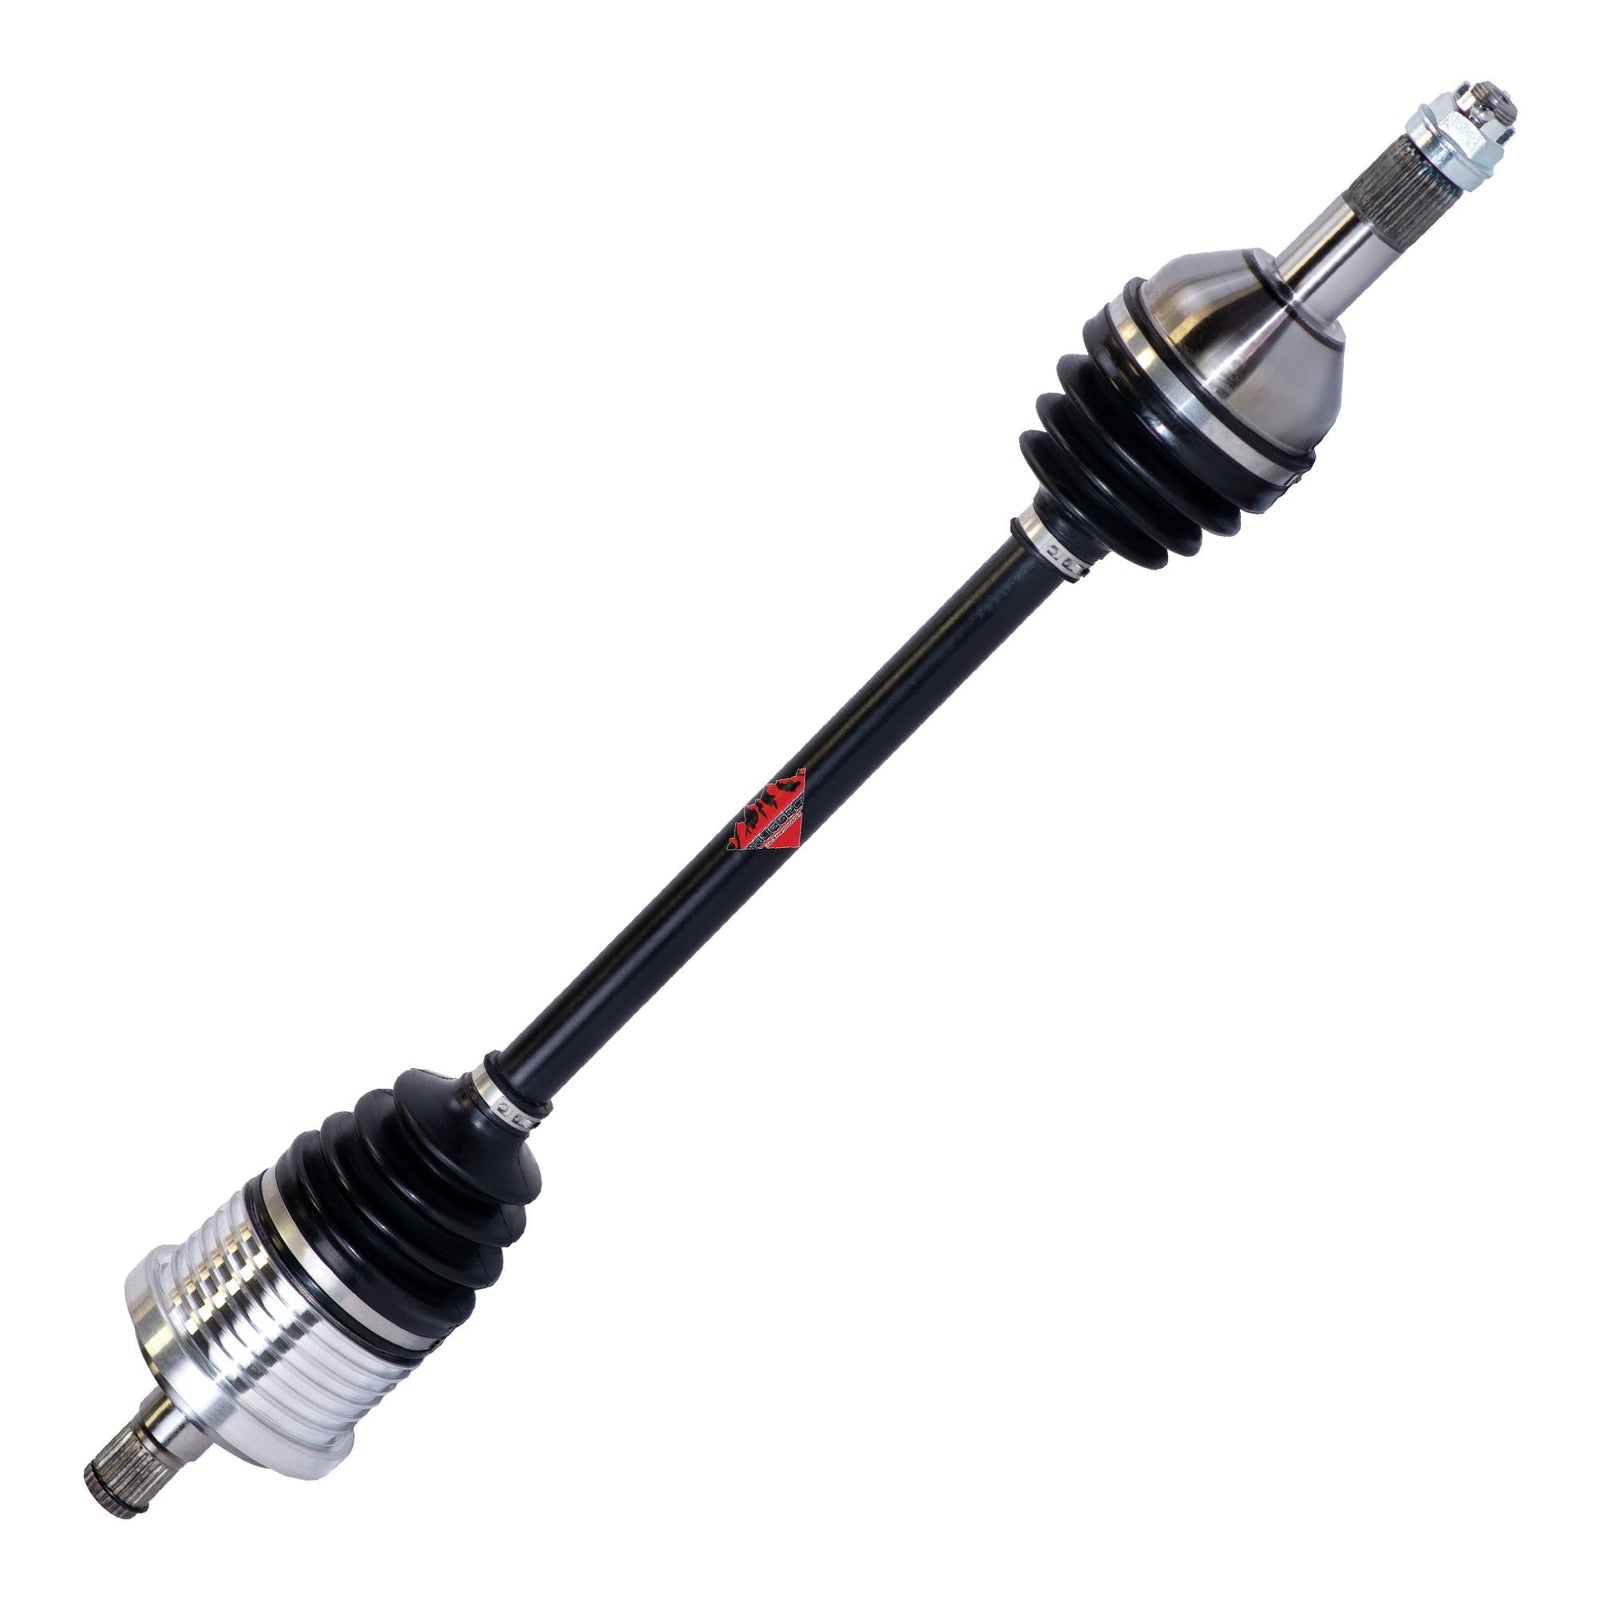 CFMOTO ZFORCE 800 Rugged Performance Axle